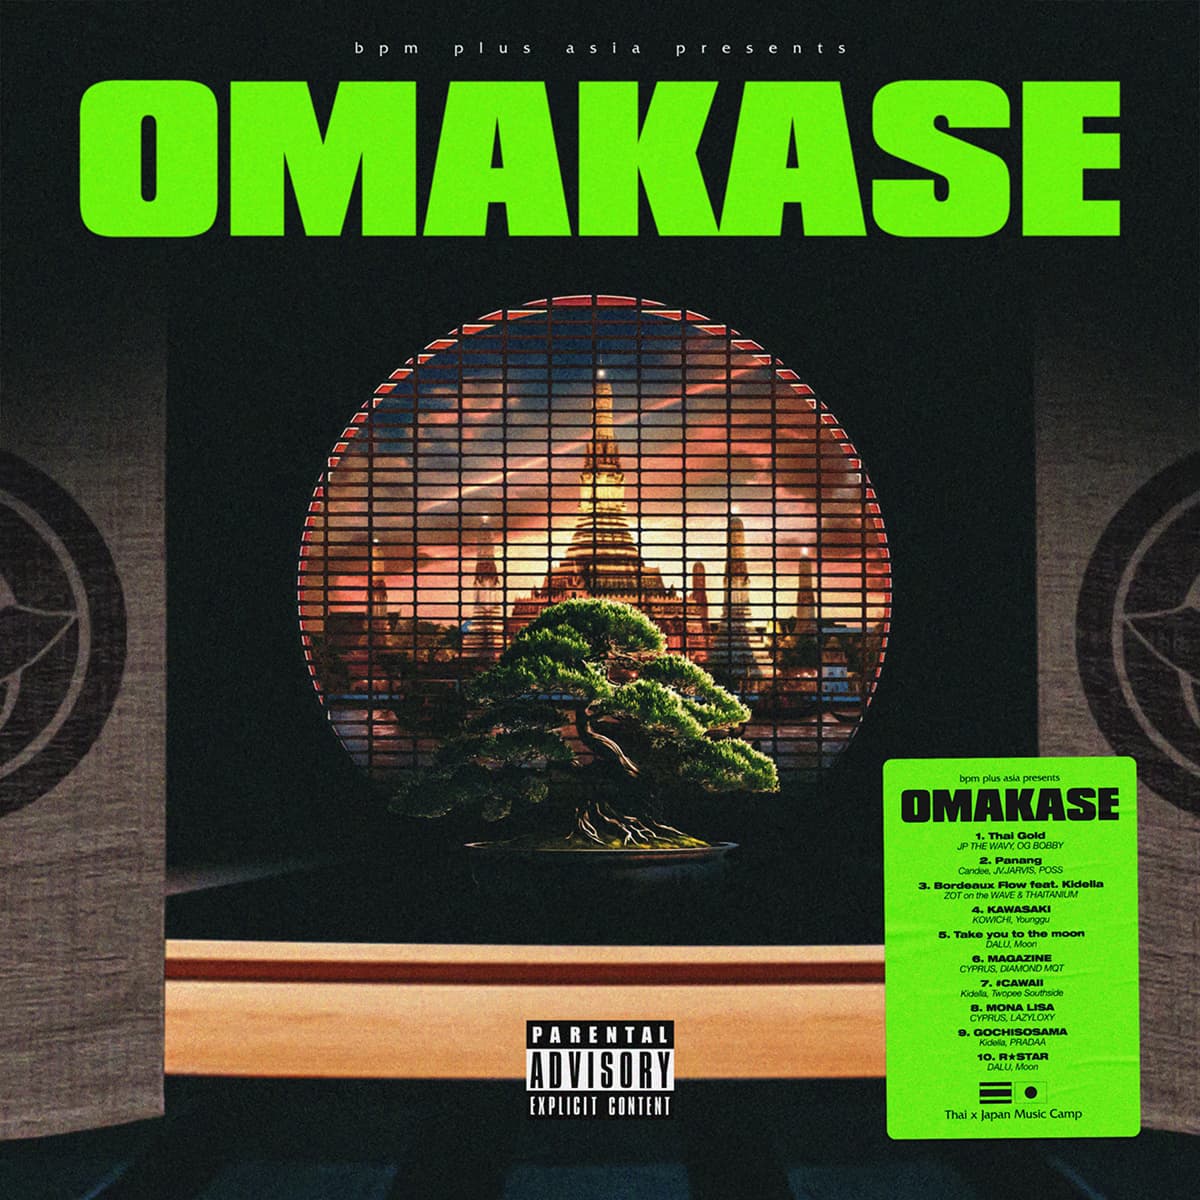 Thai×Japan Music Camp compilation album “OMAKASE” will be released on September 22nd!
In addition, a short movie containing the production scene will be released!